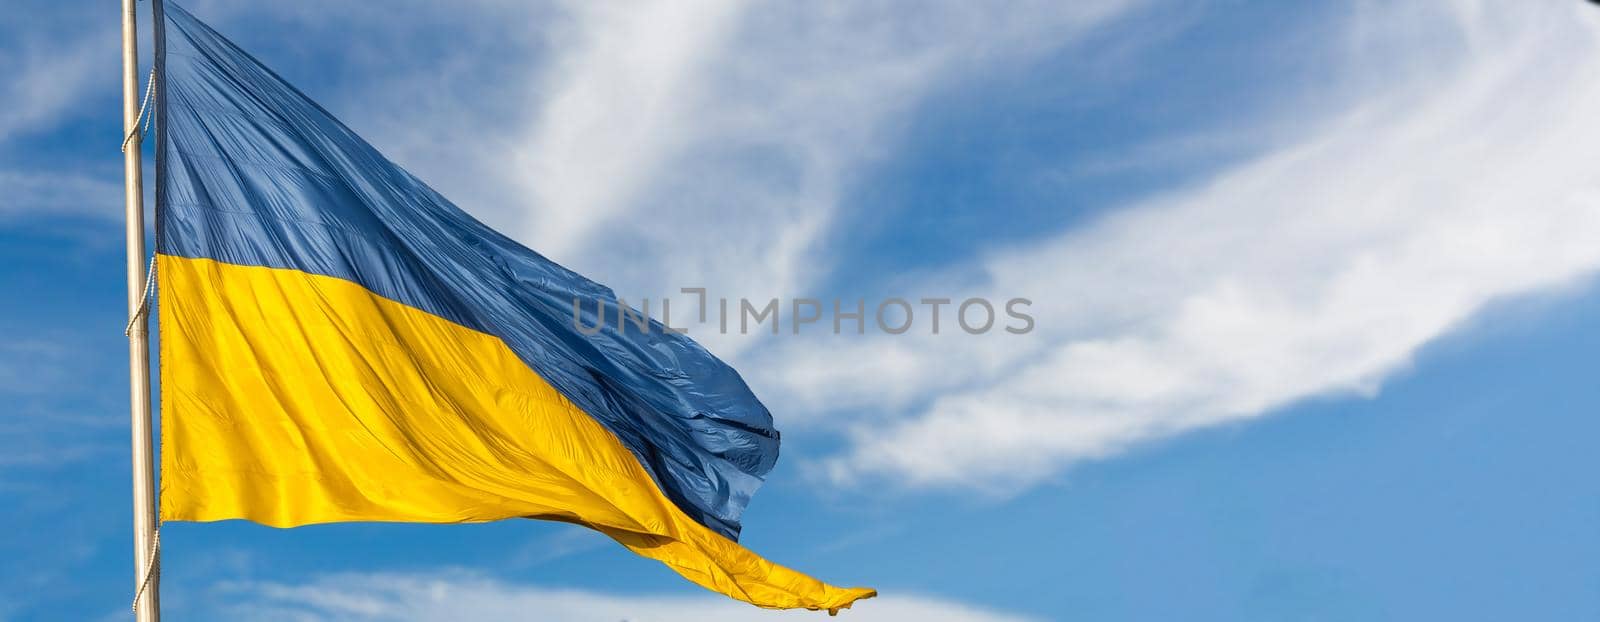 Large national flag of Ukraine flies in the blue sky. Big yellow blue Ukrainian state banner. Independence, flag, Constitution Day, National Holiday, text space. by Andelov13